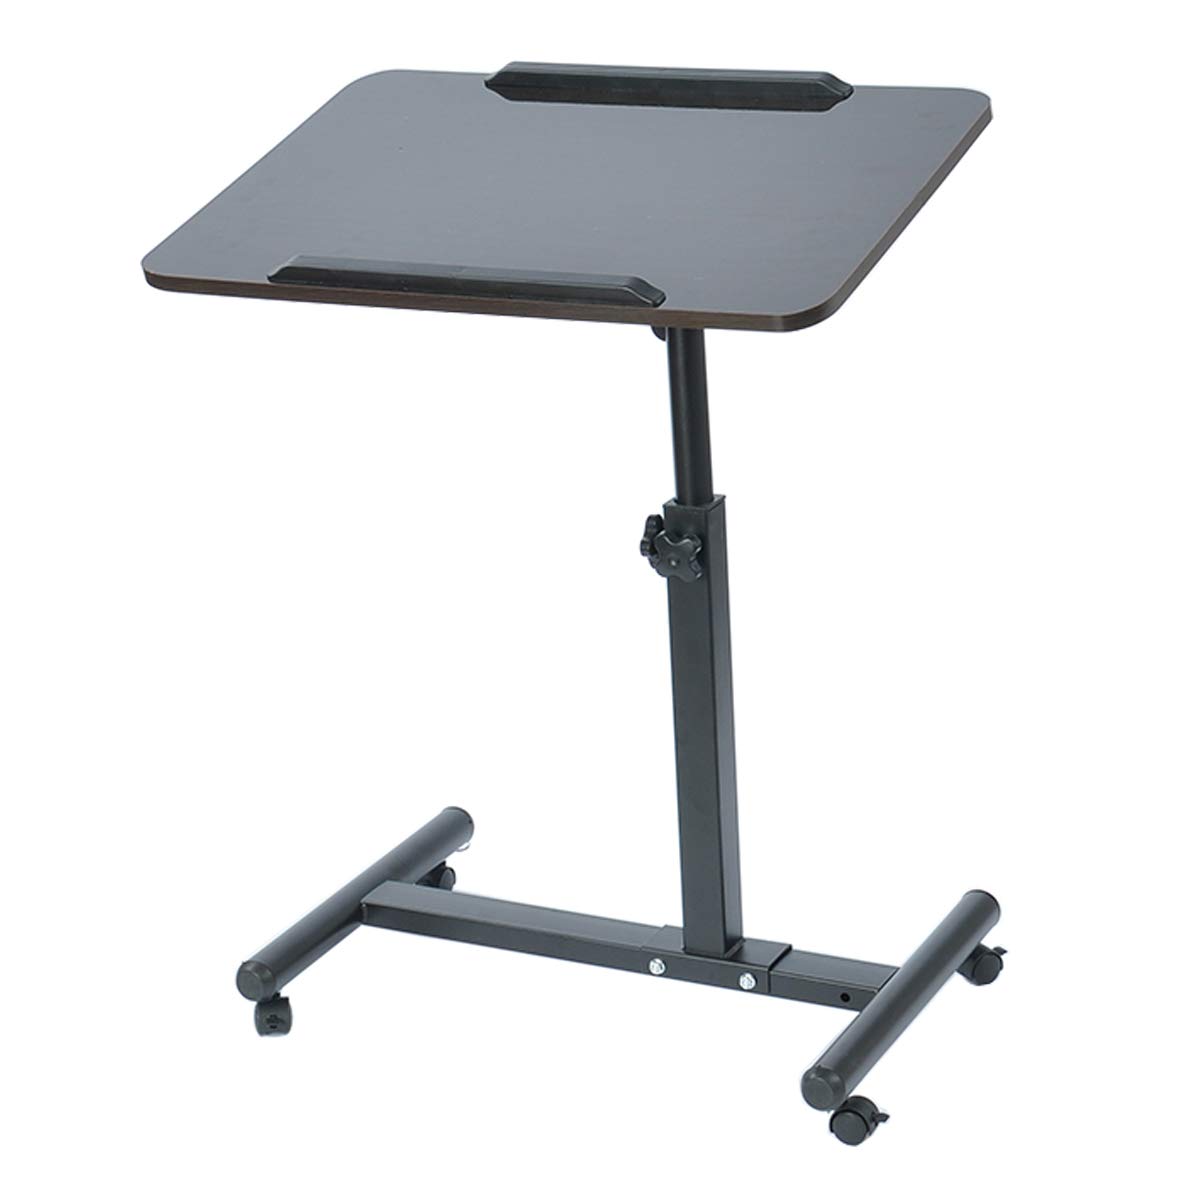 Penck Mobile Laptop Sit Stand Desk Angle & Height Adjustable Rolling Laptop Desk Cart Over Bed Hospital Table Stand Folding Portable Table